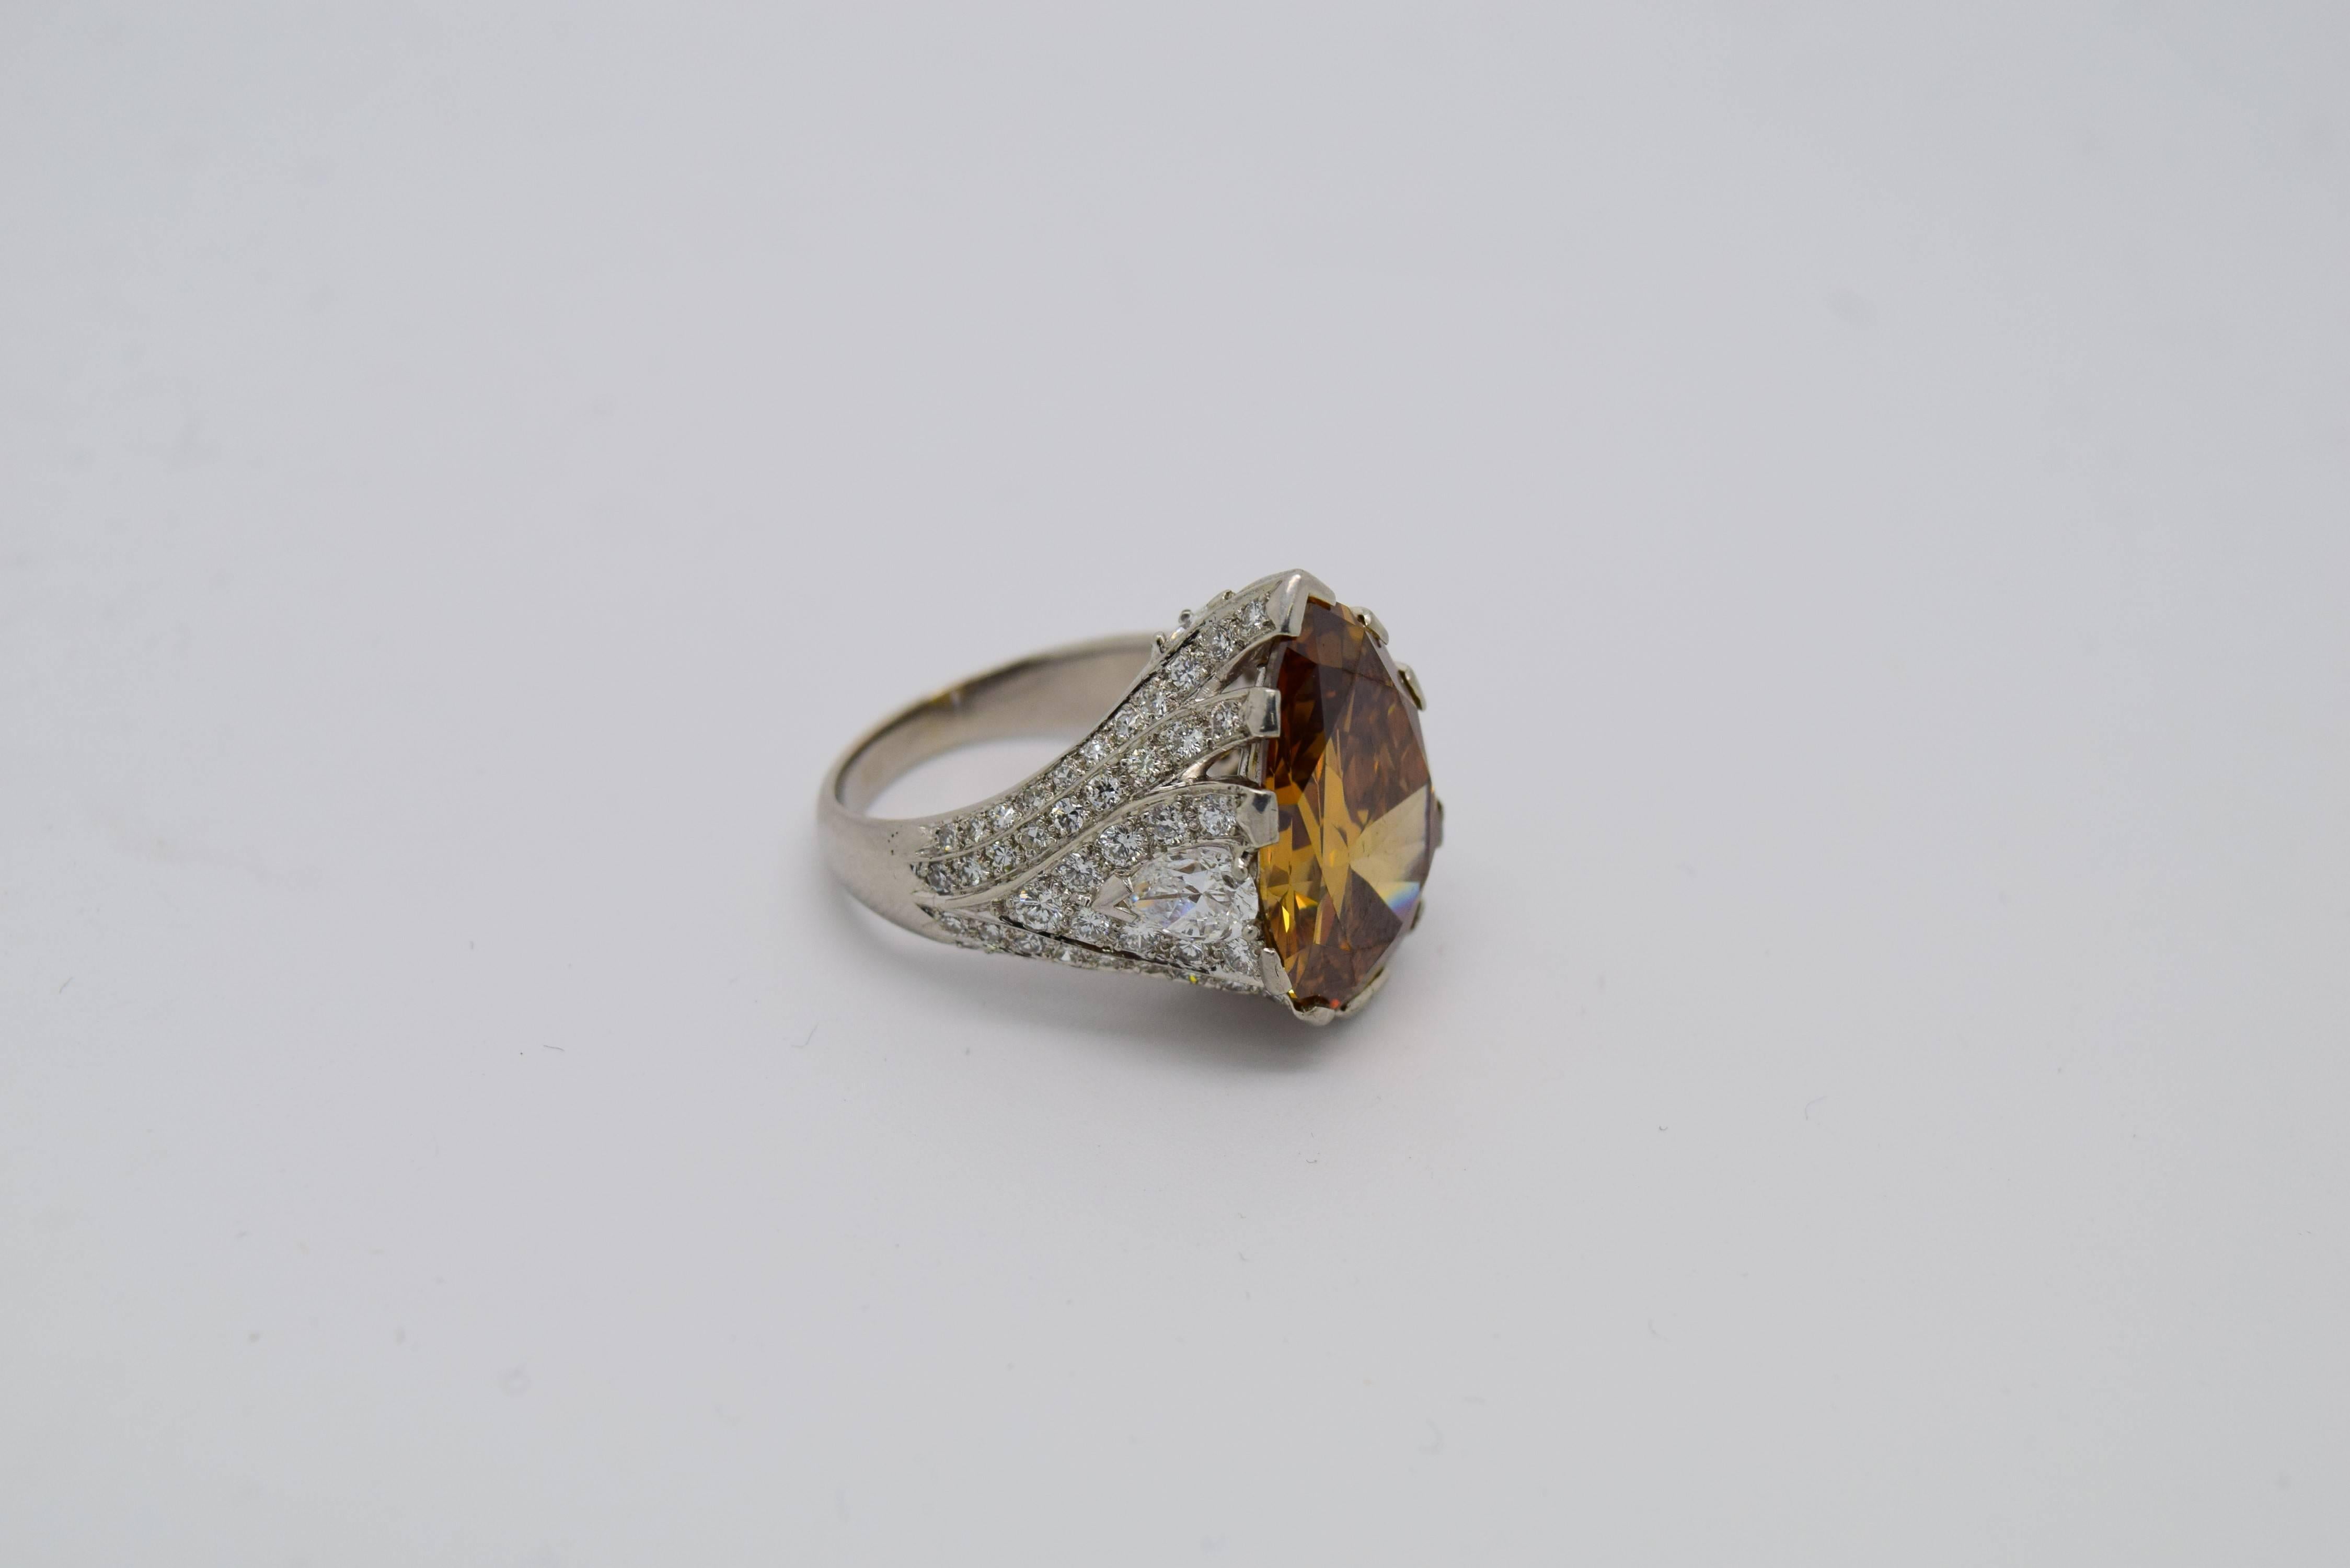 Extraordinary GIA 10.75 carat Fancy Brown Pear Shape Diamond Cocktail Ring In Excellent Condition For Sale In Chicago, IL